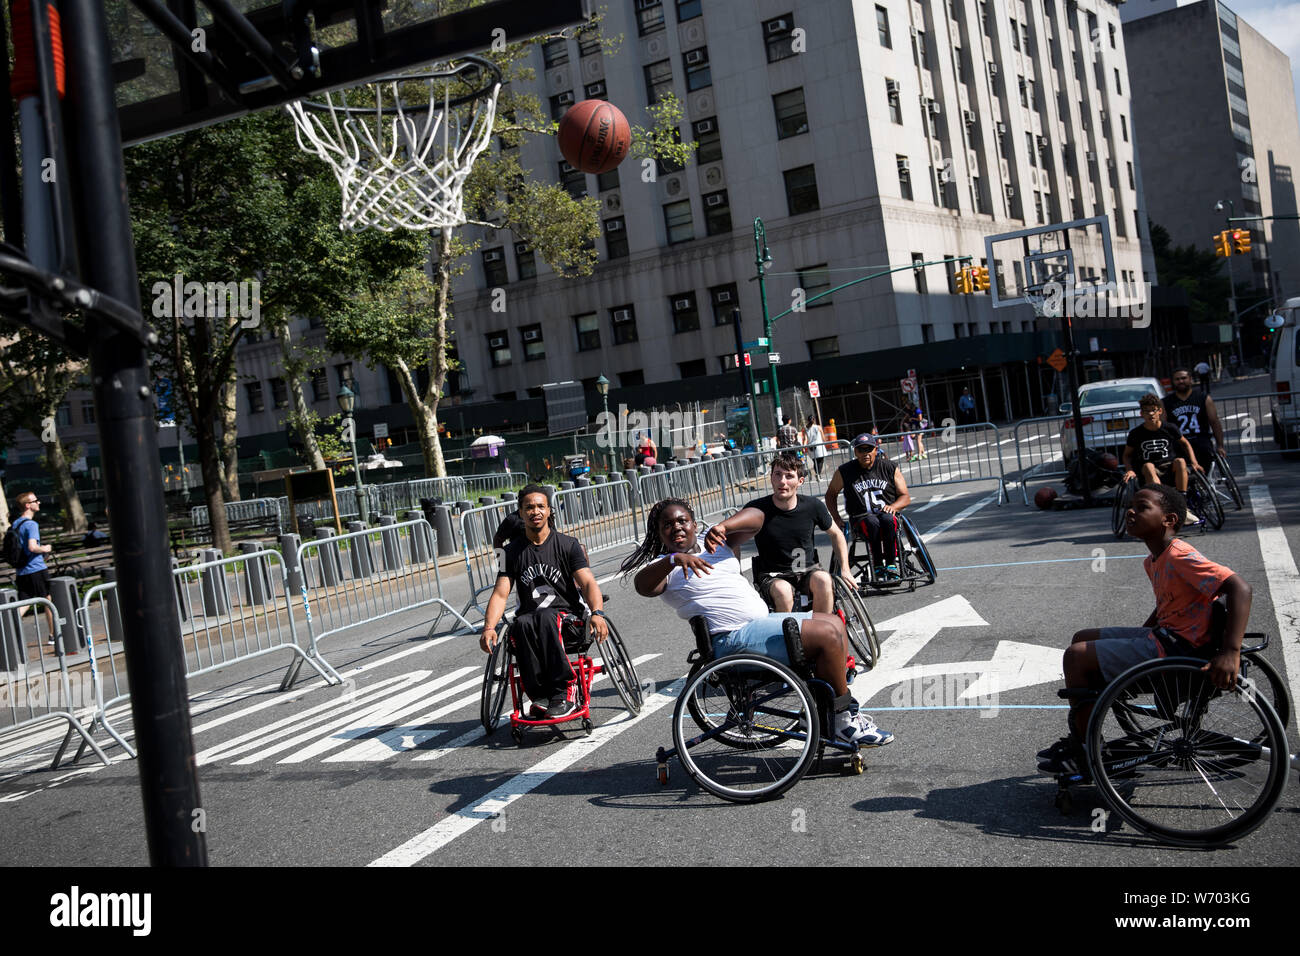 New People On in event York, York, in 2019. during wheelchairs the 2019. Aug. 3, Saturdays Aug, in Streets basketball 3rd the States, first three 2019 USA. play the New Summer United